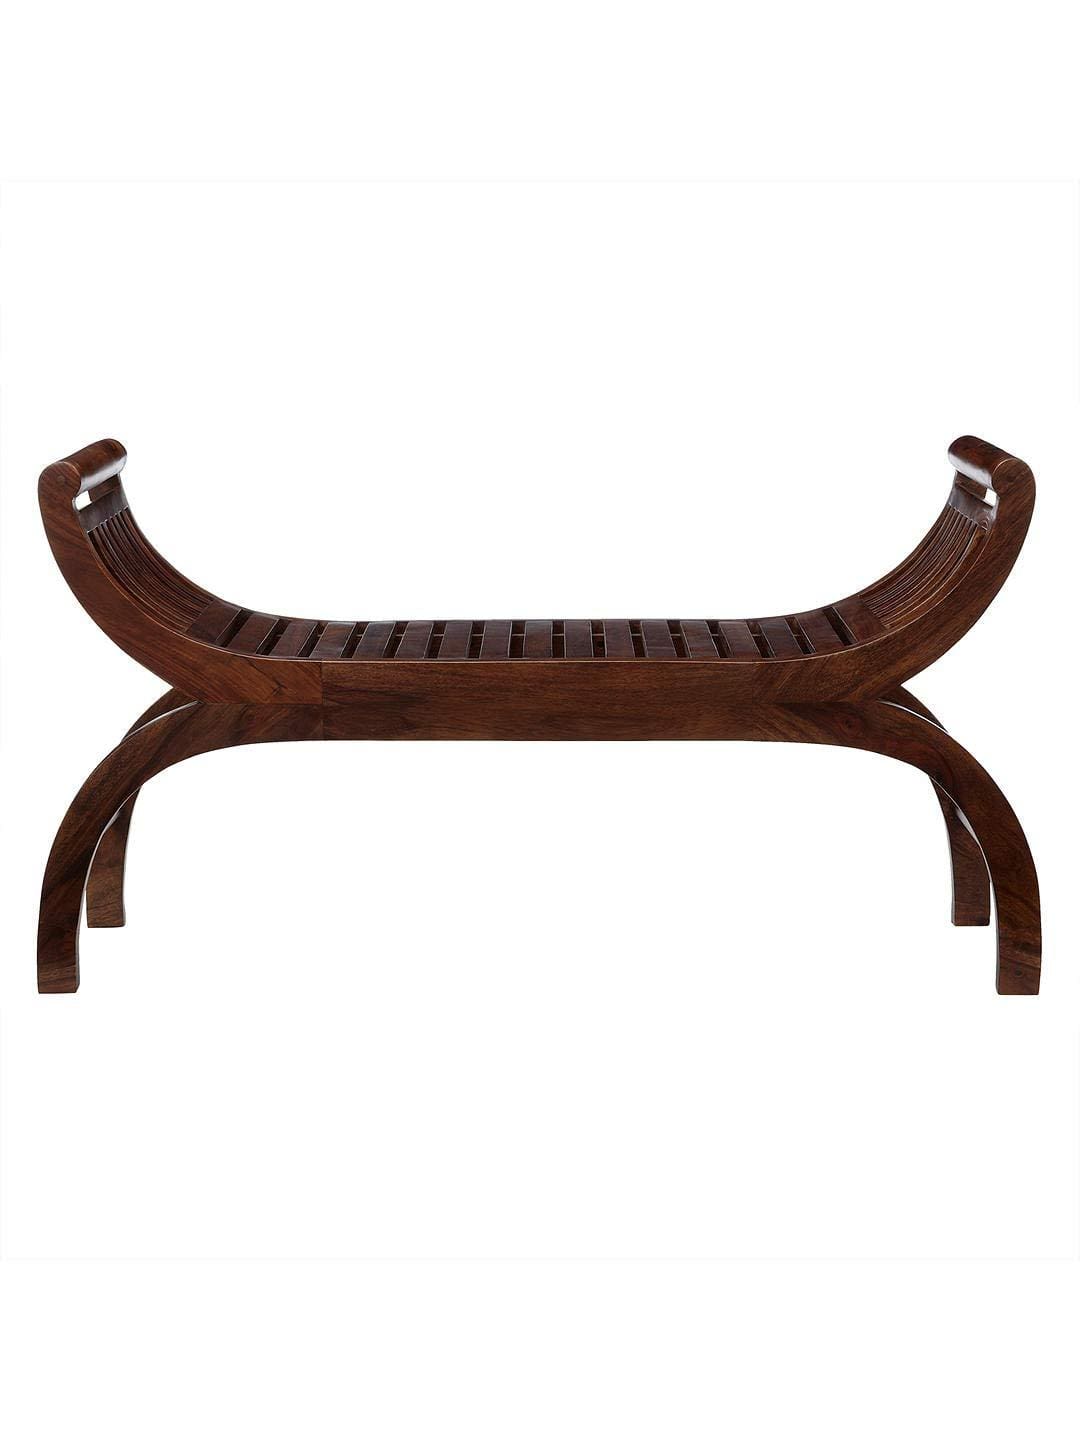 Handicrafts Sheesham Wood Rest Chair/Lounge/Backless Couch